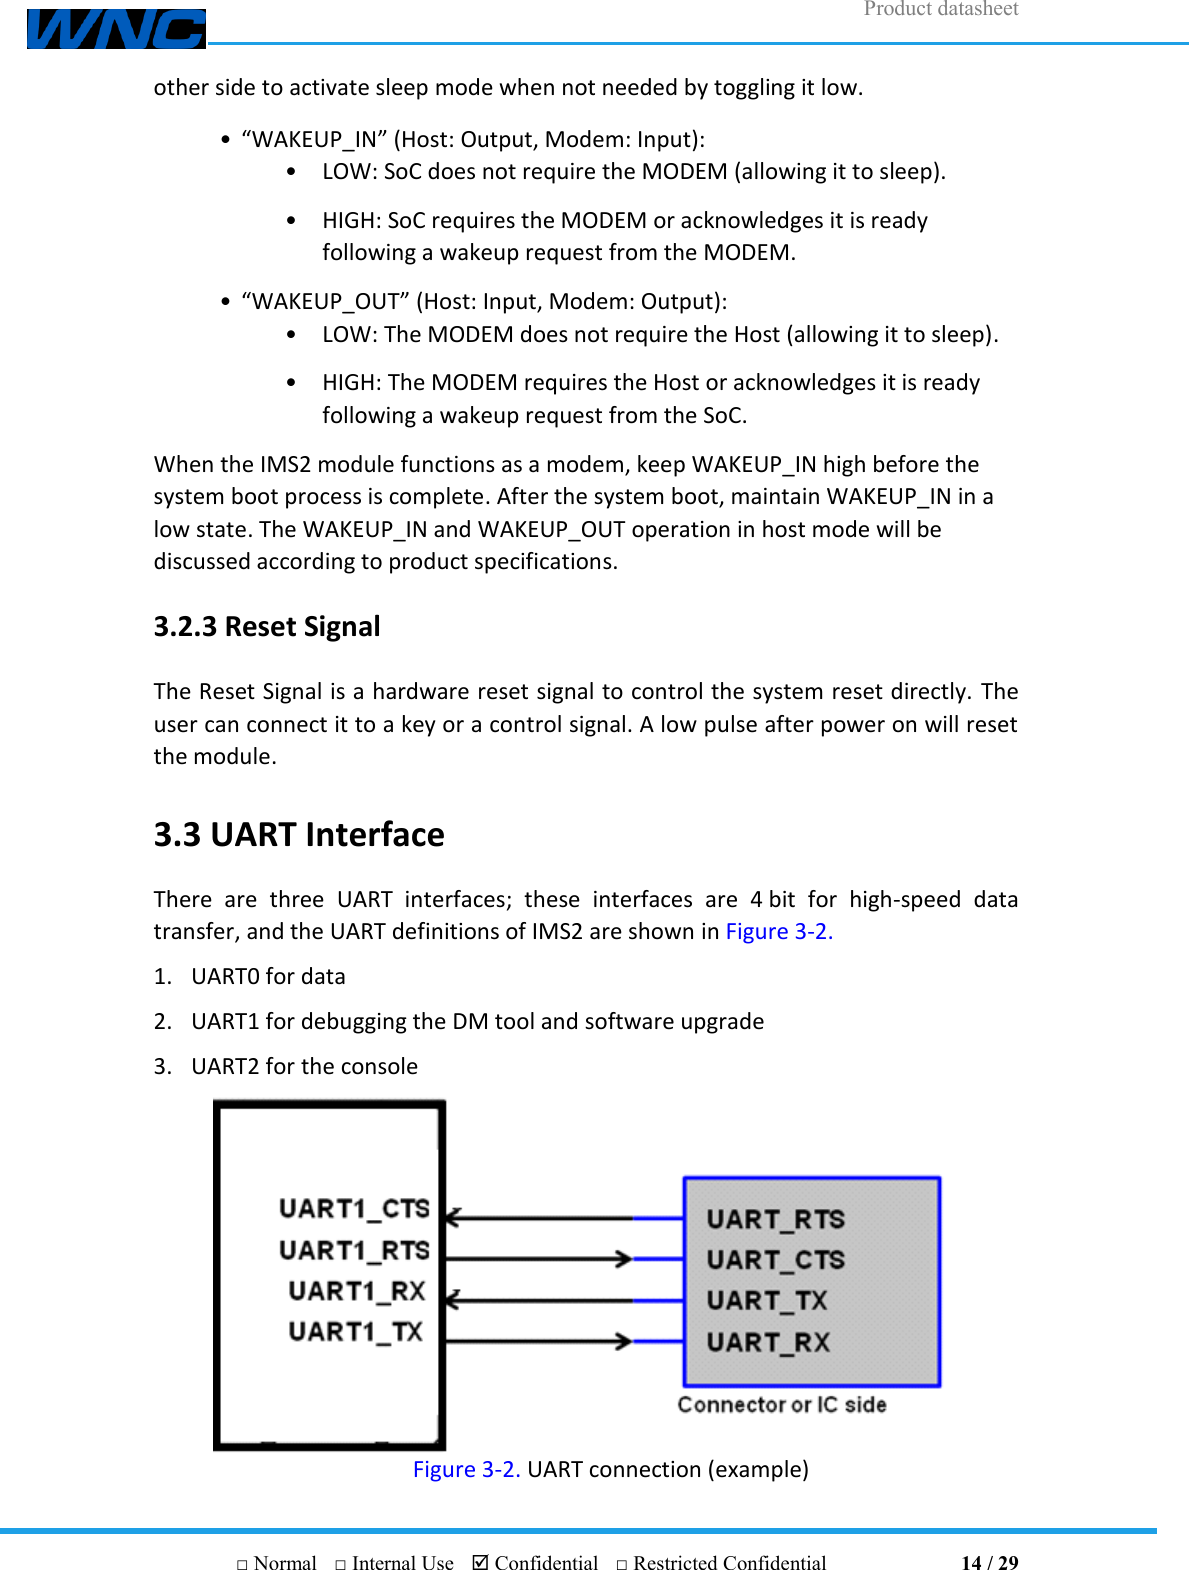 Product datasheet       □ Normal  □ Internal Use   Confidential  □ Restricted Confidential                                14 / 29 other side to activate sleep mode when not needed by toggling it low. • “WAKEUP_IN” (Host: Output, Modem: Input): • LOW: SoC does not require the MODEM (allowing it to sleep). • HIGH: SoC requires the MODEM or acknowledges it is ready following a wakeup request from the MODEM. • “WAKEUP_OUT” (Host: Input, Modem: Output):   • LOW: The MODEM does not require the Host (allowing it to sleep). • HIGH: The MODEM requires the Host or acknowledges it is ready following a wakeup request from the SoC. When the IMS2 module functions as a modem, keep WAKEUP_IN high before the system boot process is complete. After the system boot, maintain WAKEUP_IN in a low state. The WAKEUP_IN and WAKEUP_OUT operation in host mode will be discussed according to product specifications. 3.2.3 Reset Signal The Reset Signal is a hardware reset signal to control the system reset directly. The user can connect it to a key or a control signal. A low pulse after power on will reset the module. 3.3 UART Interface There  are  three  UART  interfaces;  these  interfaces  are  4 bit  for  high-speed  data transfer, and the UART definitions of IMS2 are shown in Figure 3-2. 1. UART0 for data 2. UART1 for debugging the DM tool and software upgrade 3. UART2 for the console  Figure 3-2. UART connection (example) 